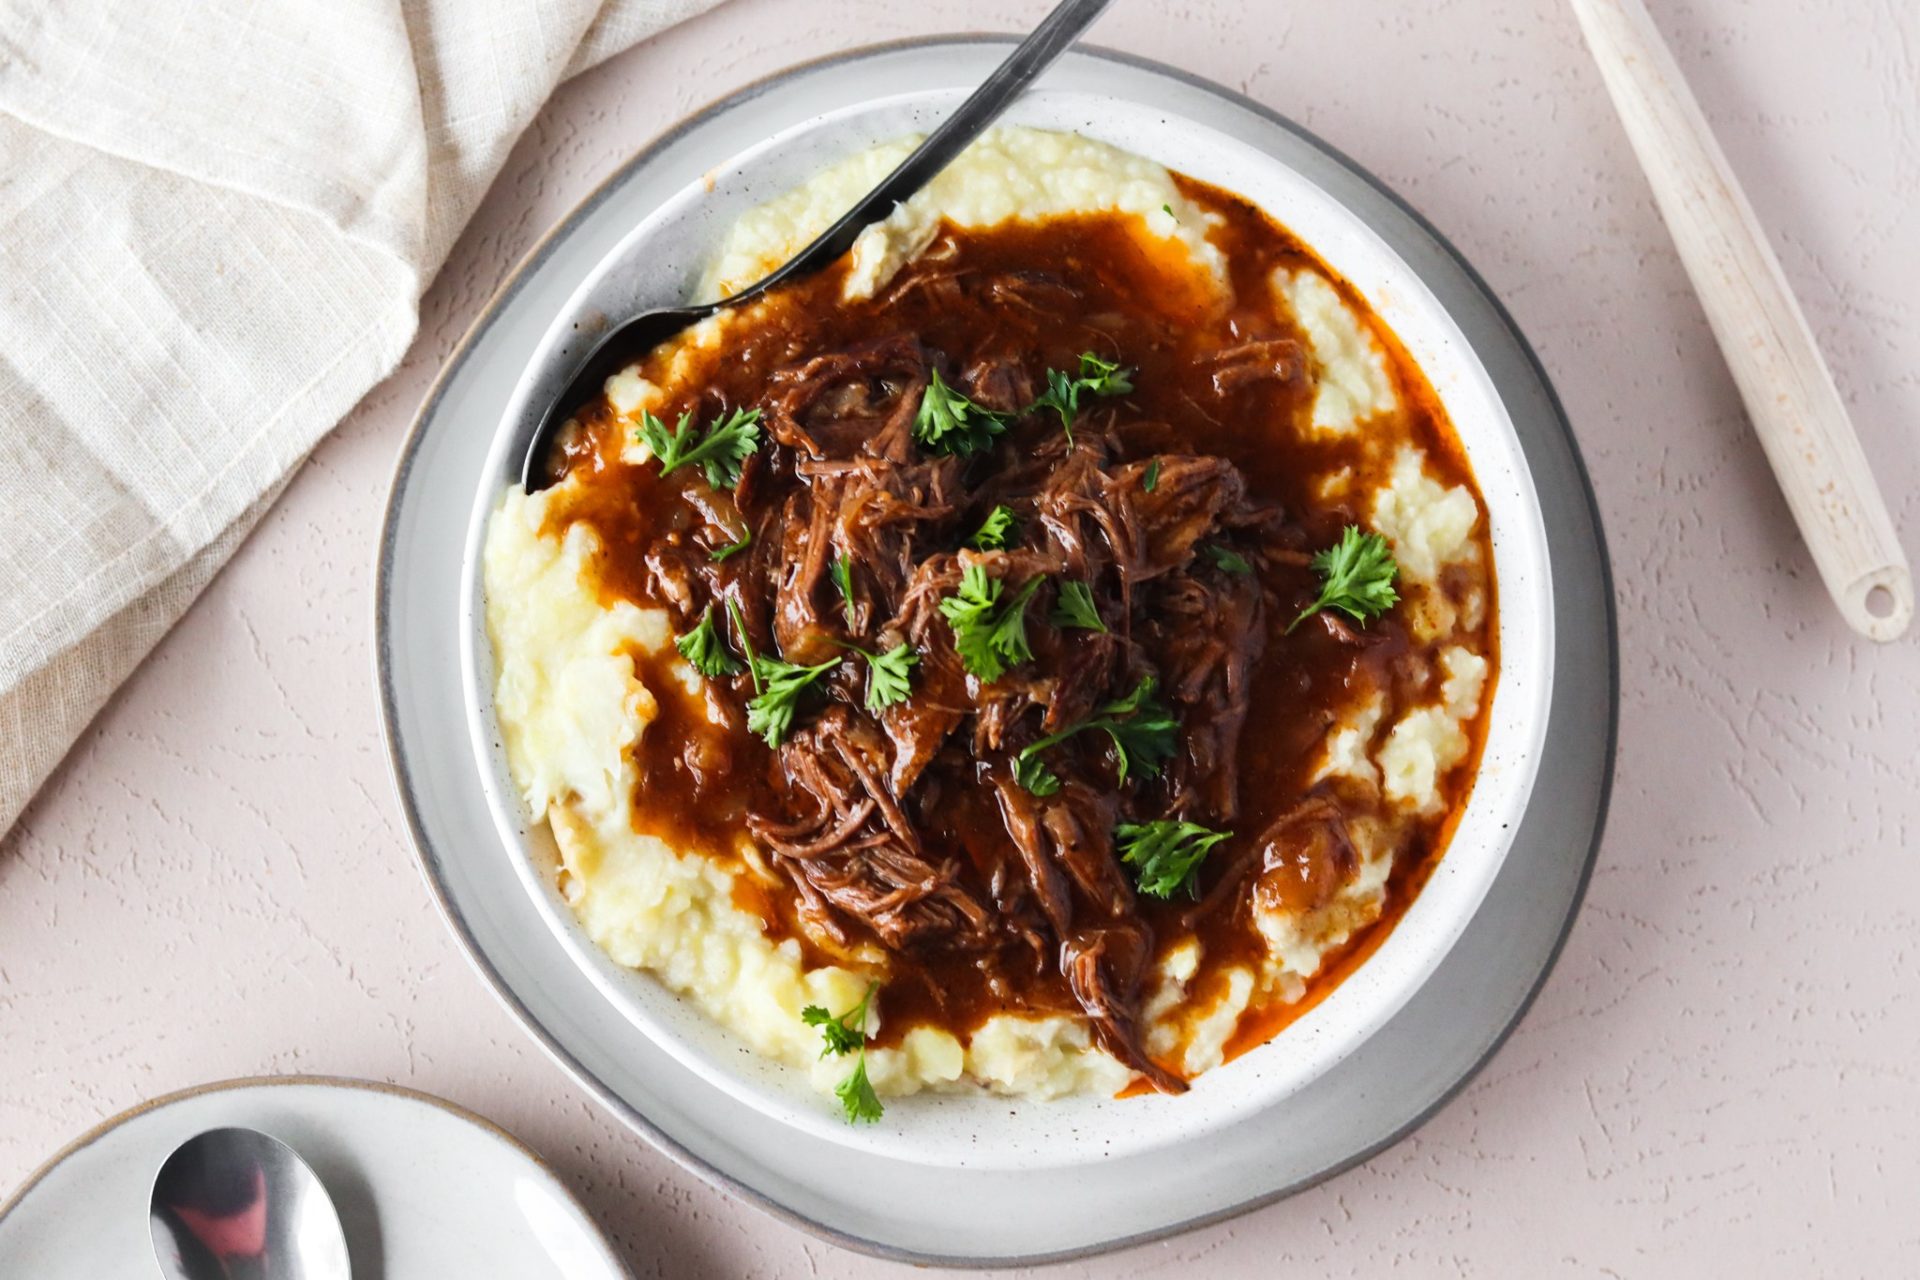 cauliflower mash with braised short rib and gravy whole 30 approved recipe